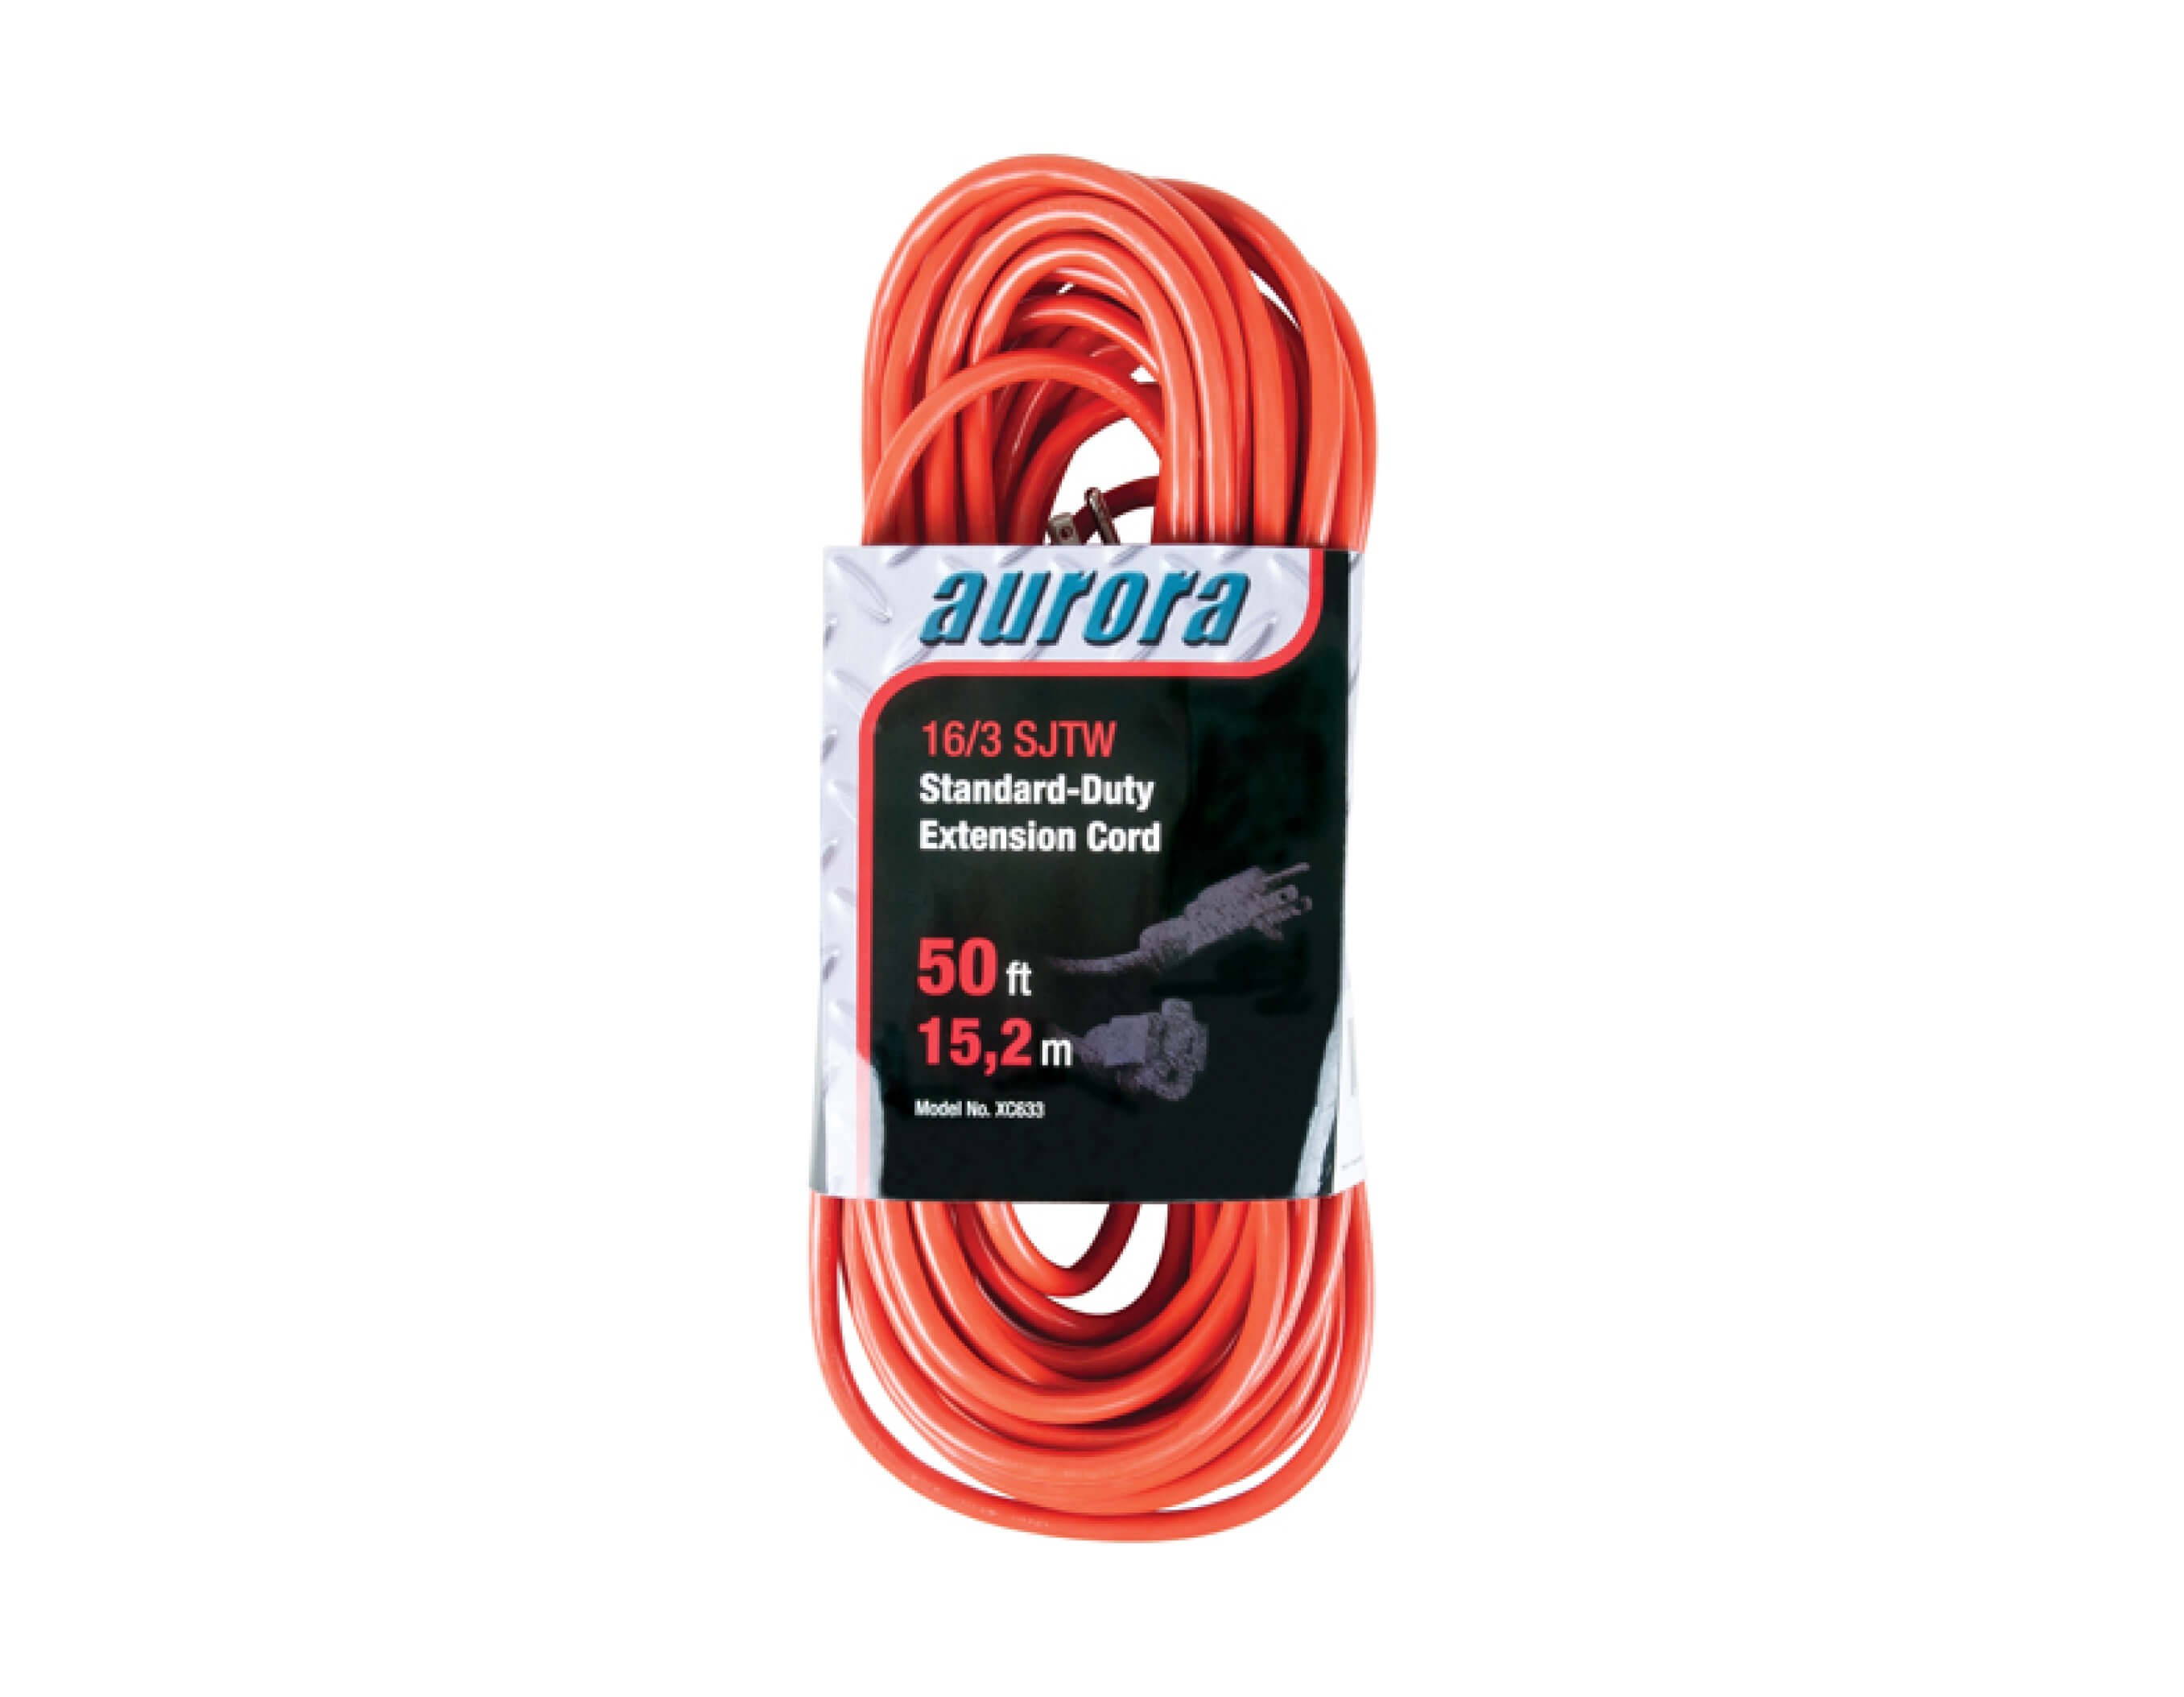 I/O Extension Cords STD 50ft Org 1out